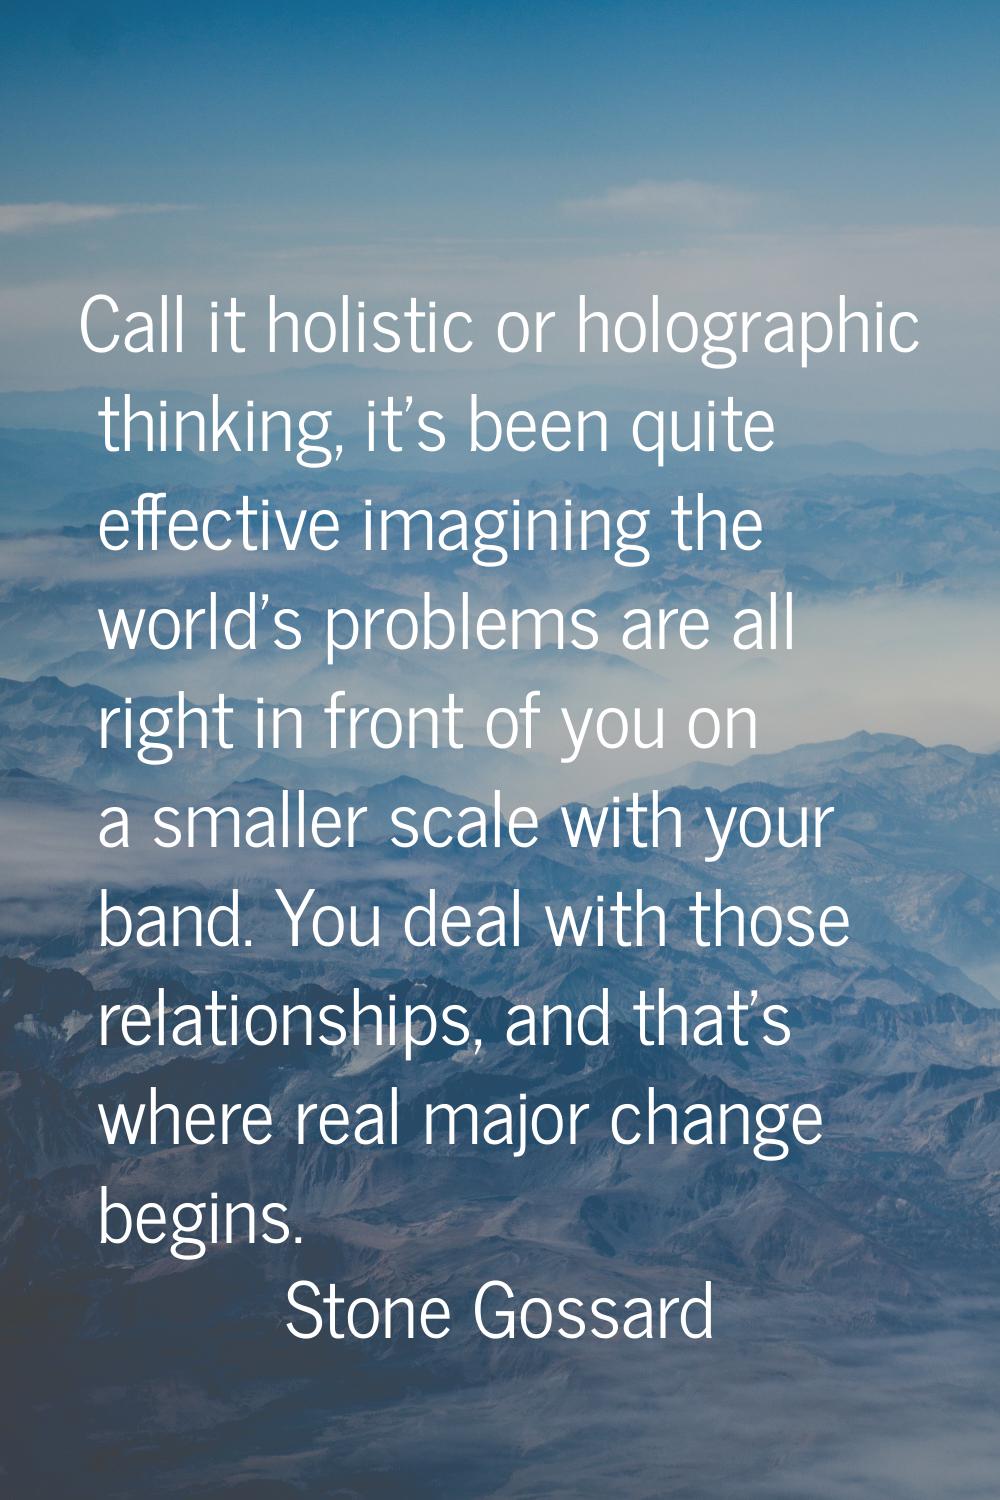 Call it holistic or holographic thinking, it's been quite effective imagining the world's problems 